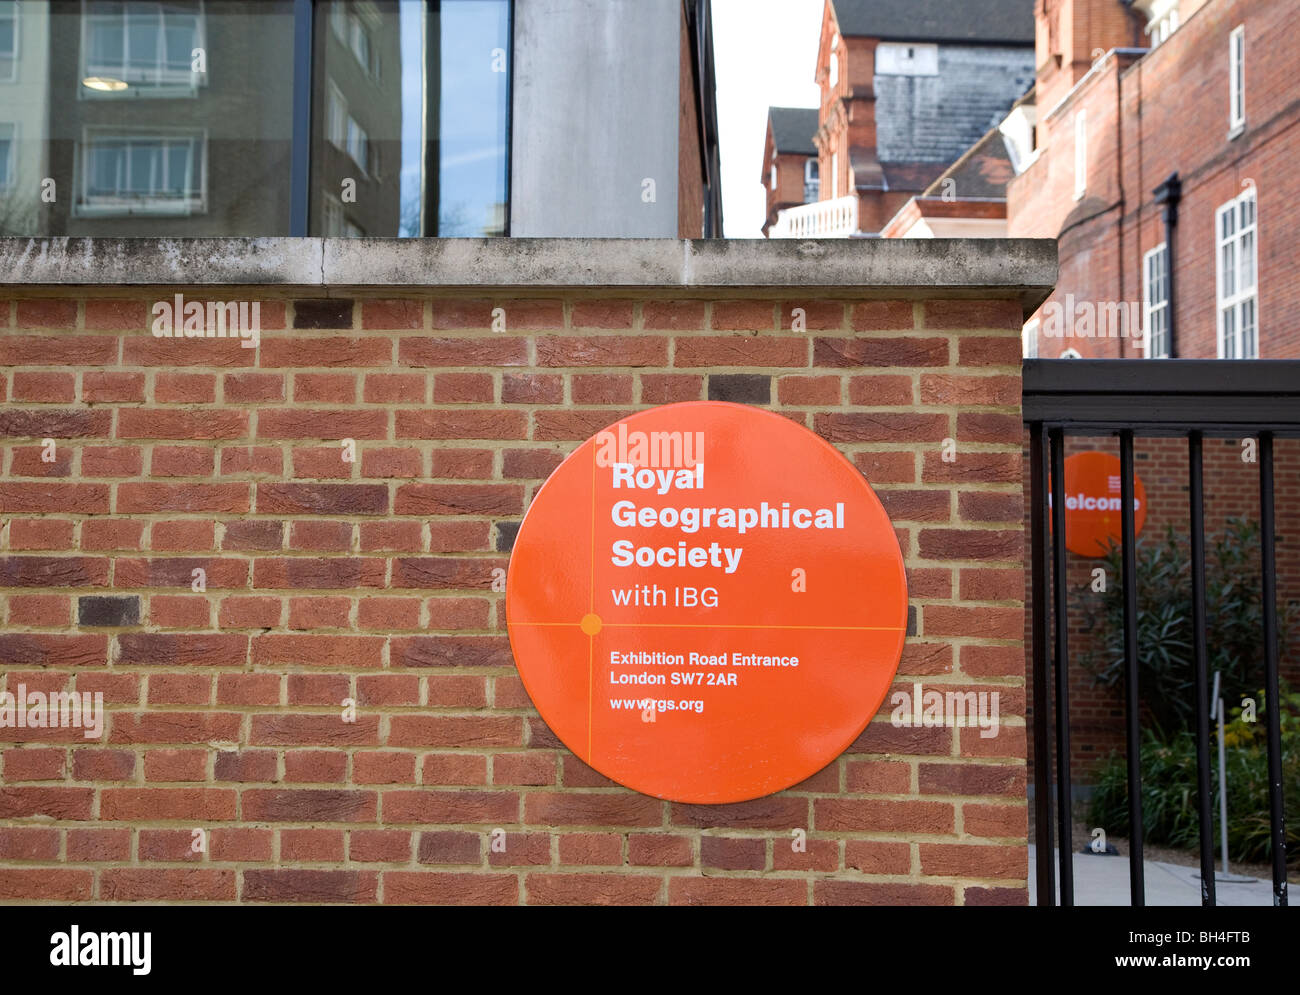 Royal Geographical Society, London Stock Photo